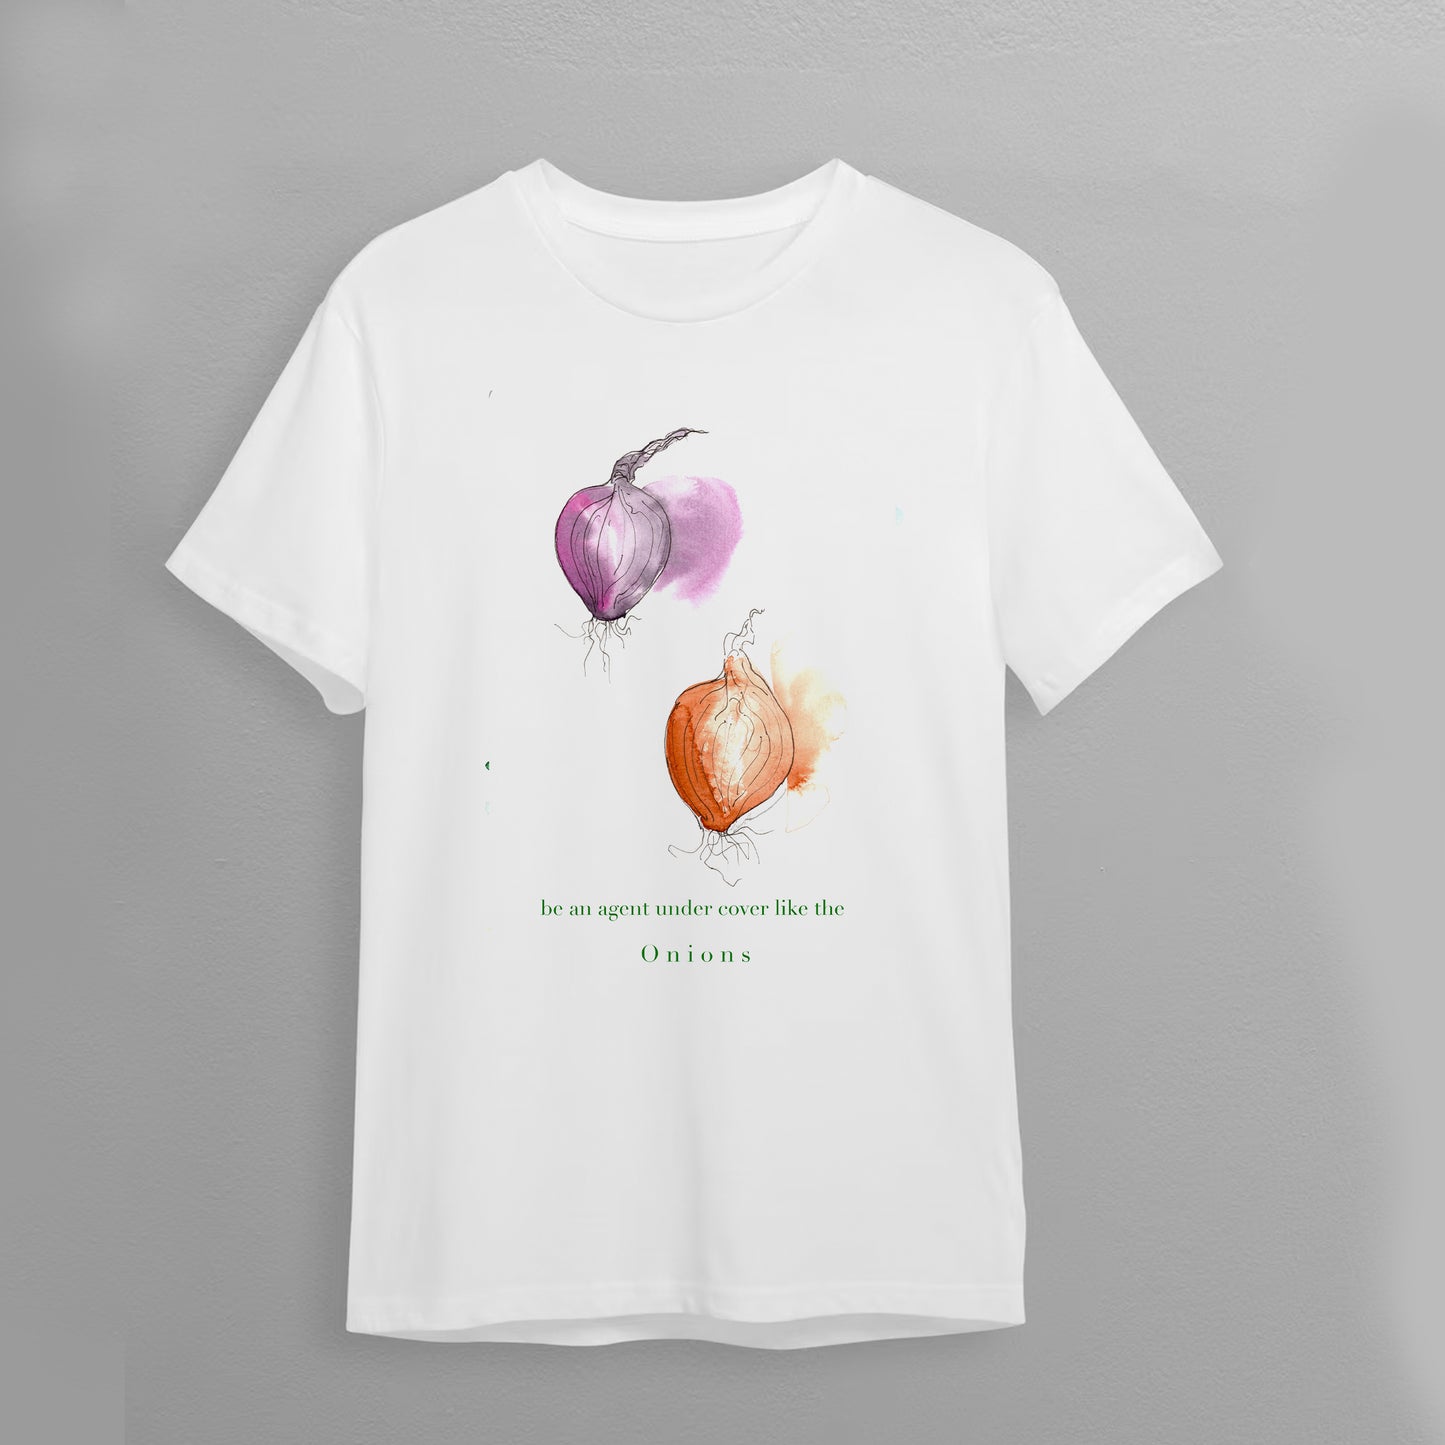 T-Shirt "Be an agent under cover like the onions"